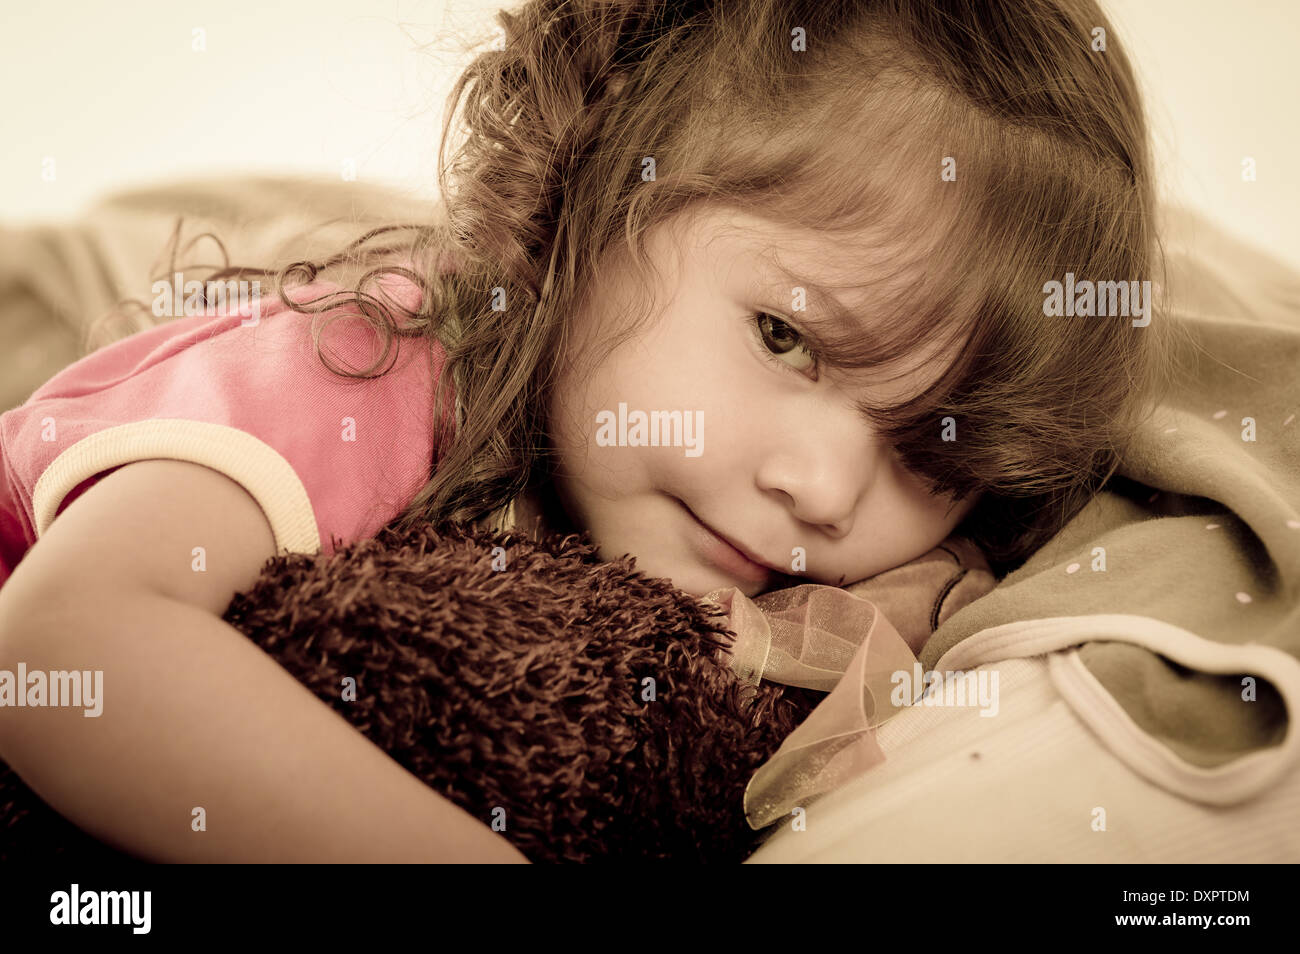 Sad little girl lying in bed colortoned Stock Photo